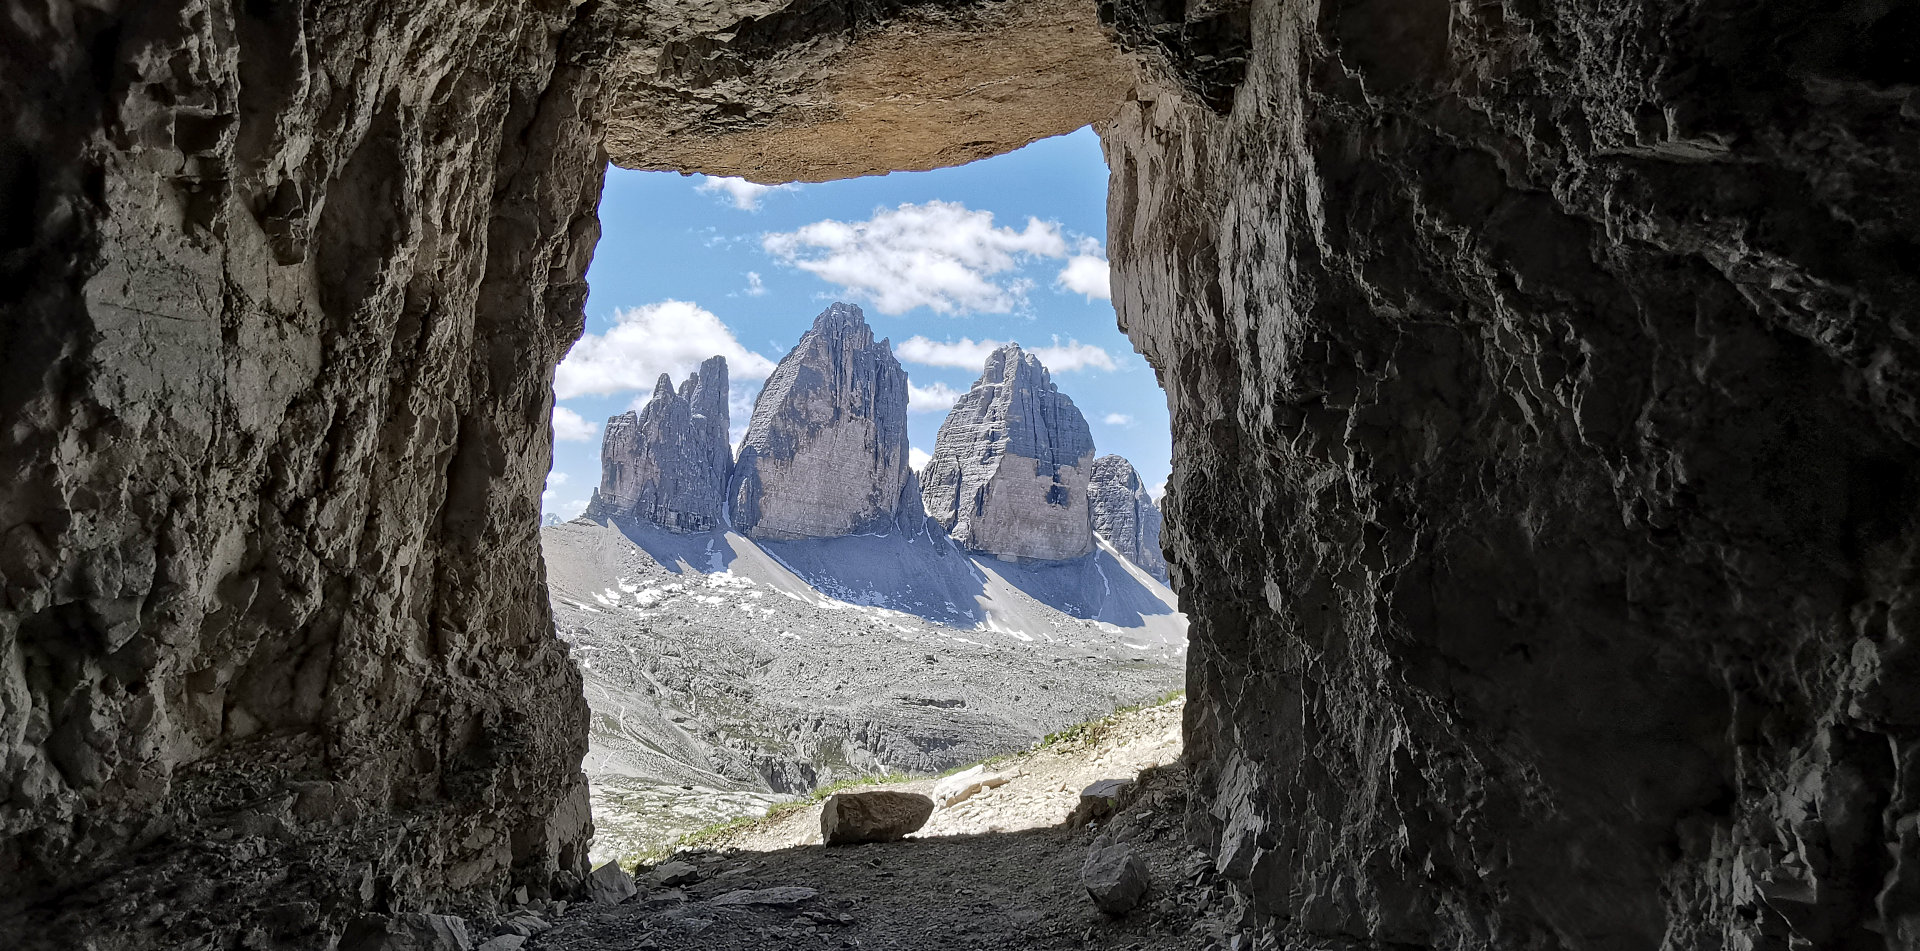 Have a look at the Dolomites!